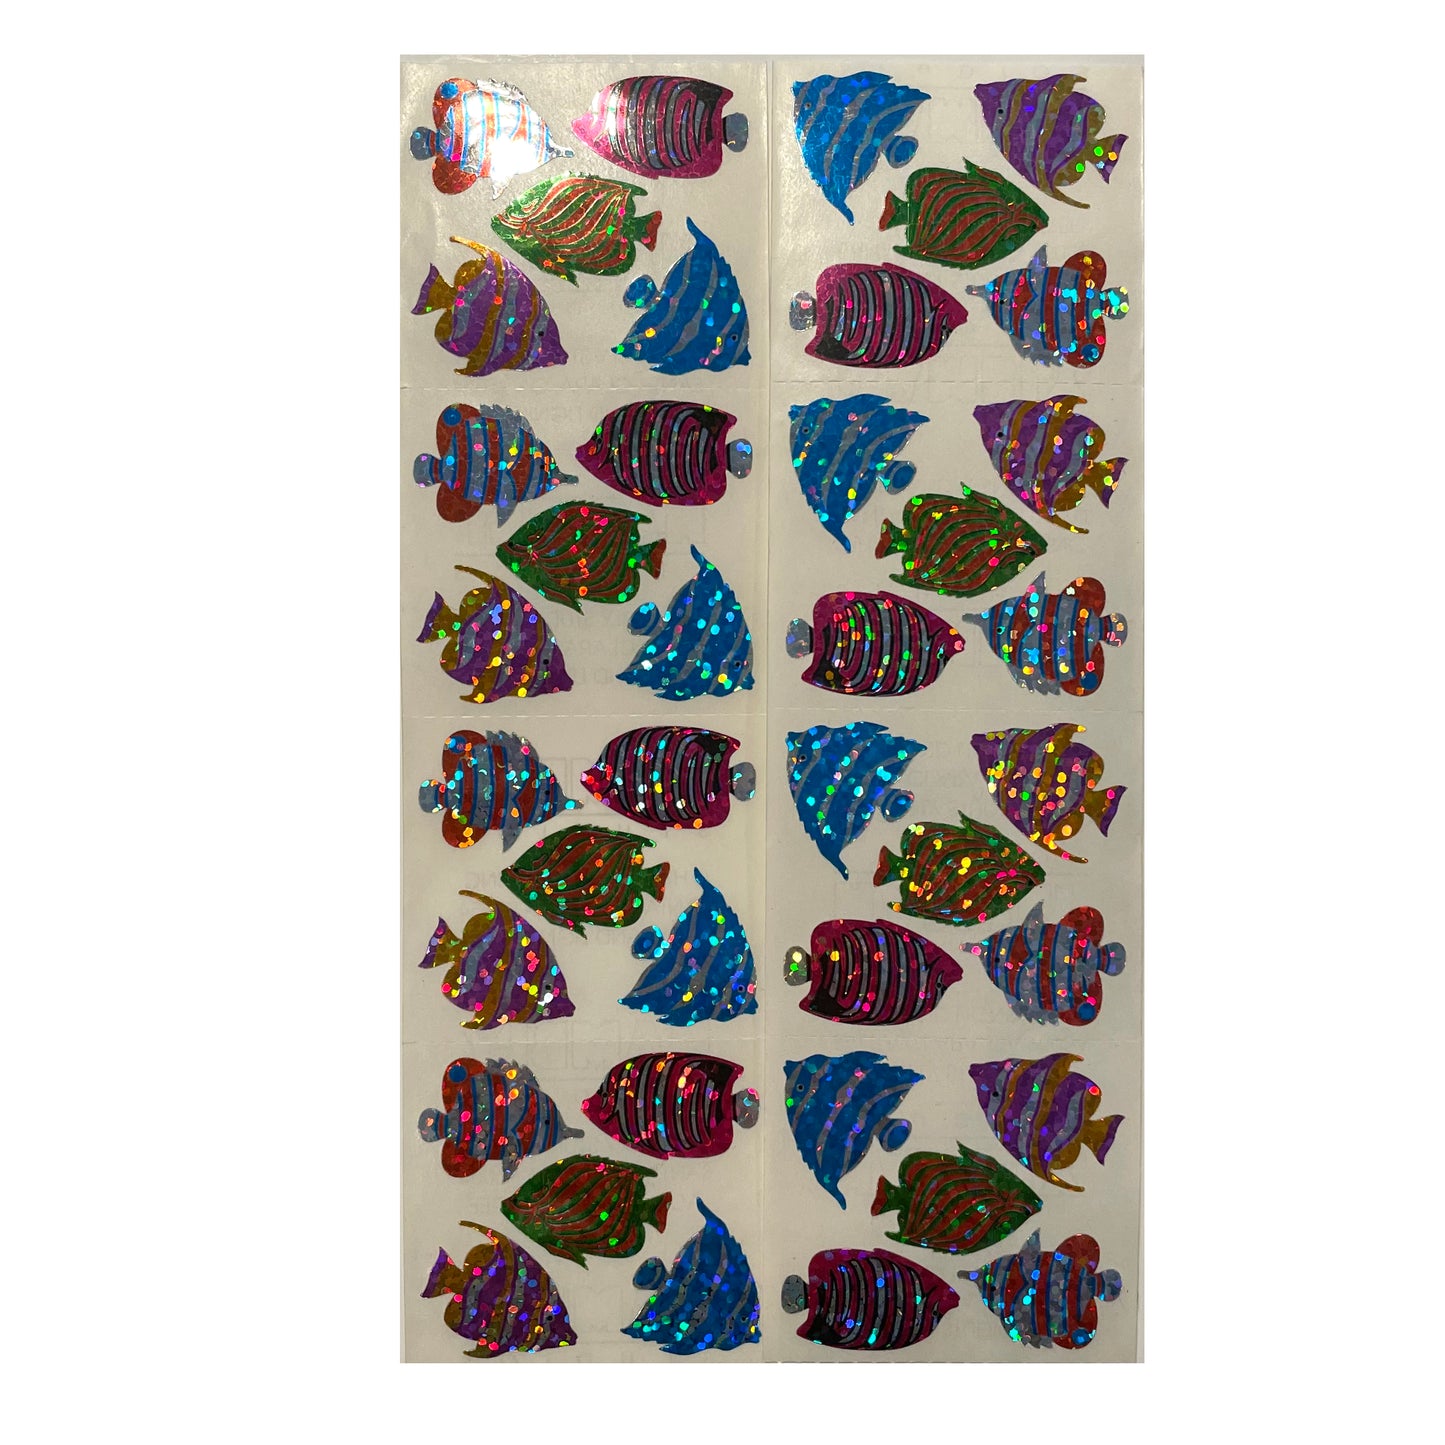 HAMBLY: 5 colorful angel fish glitter stickers